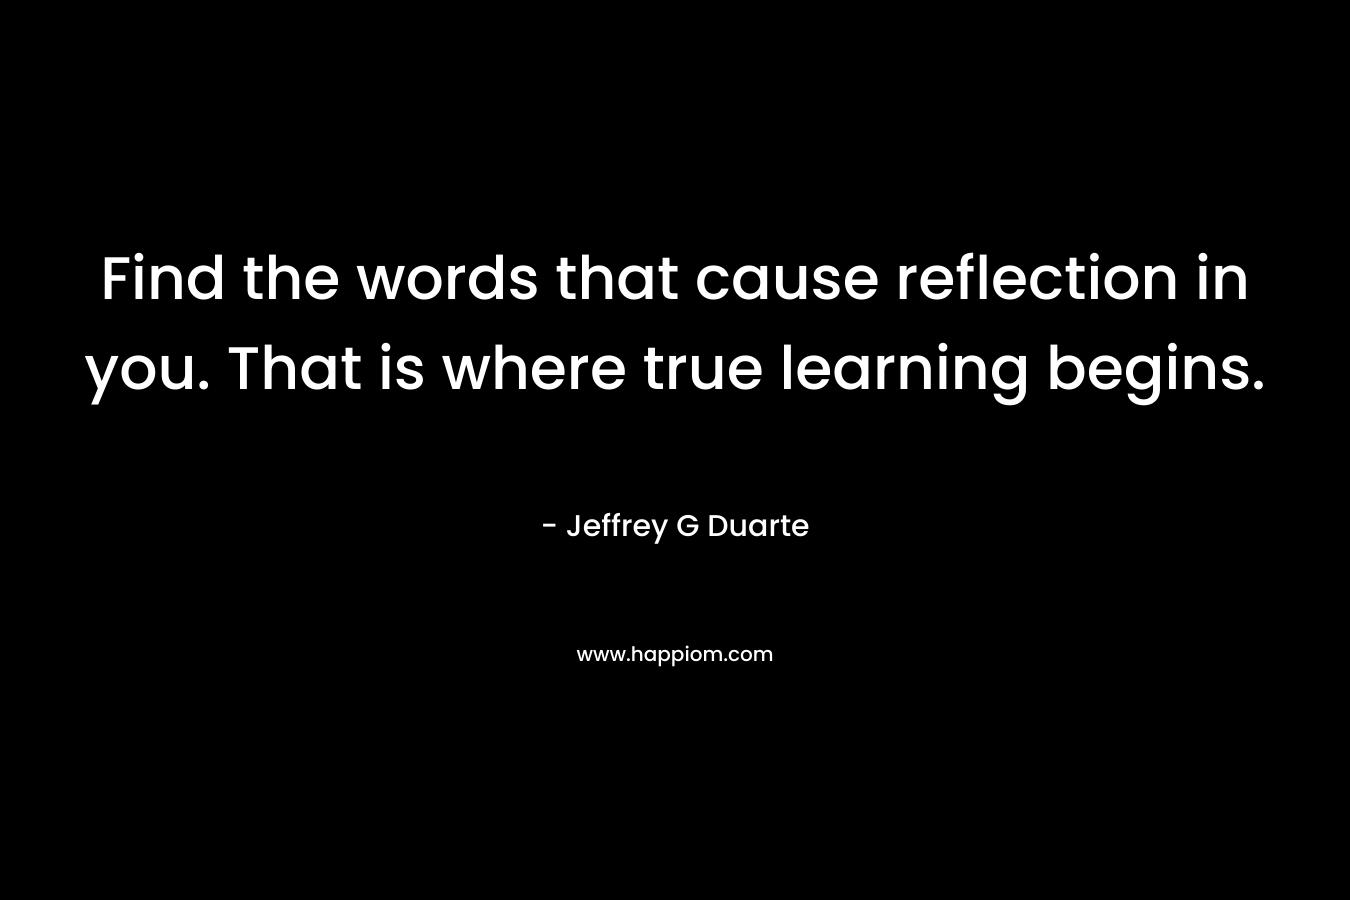 Find the words that cause reflection in you. That is where true learning begins. – Jeffrey G Duarte